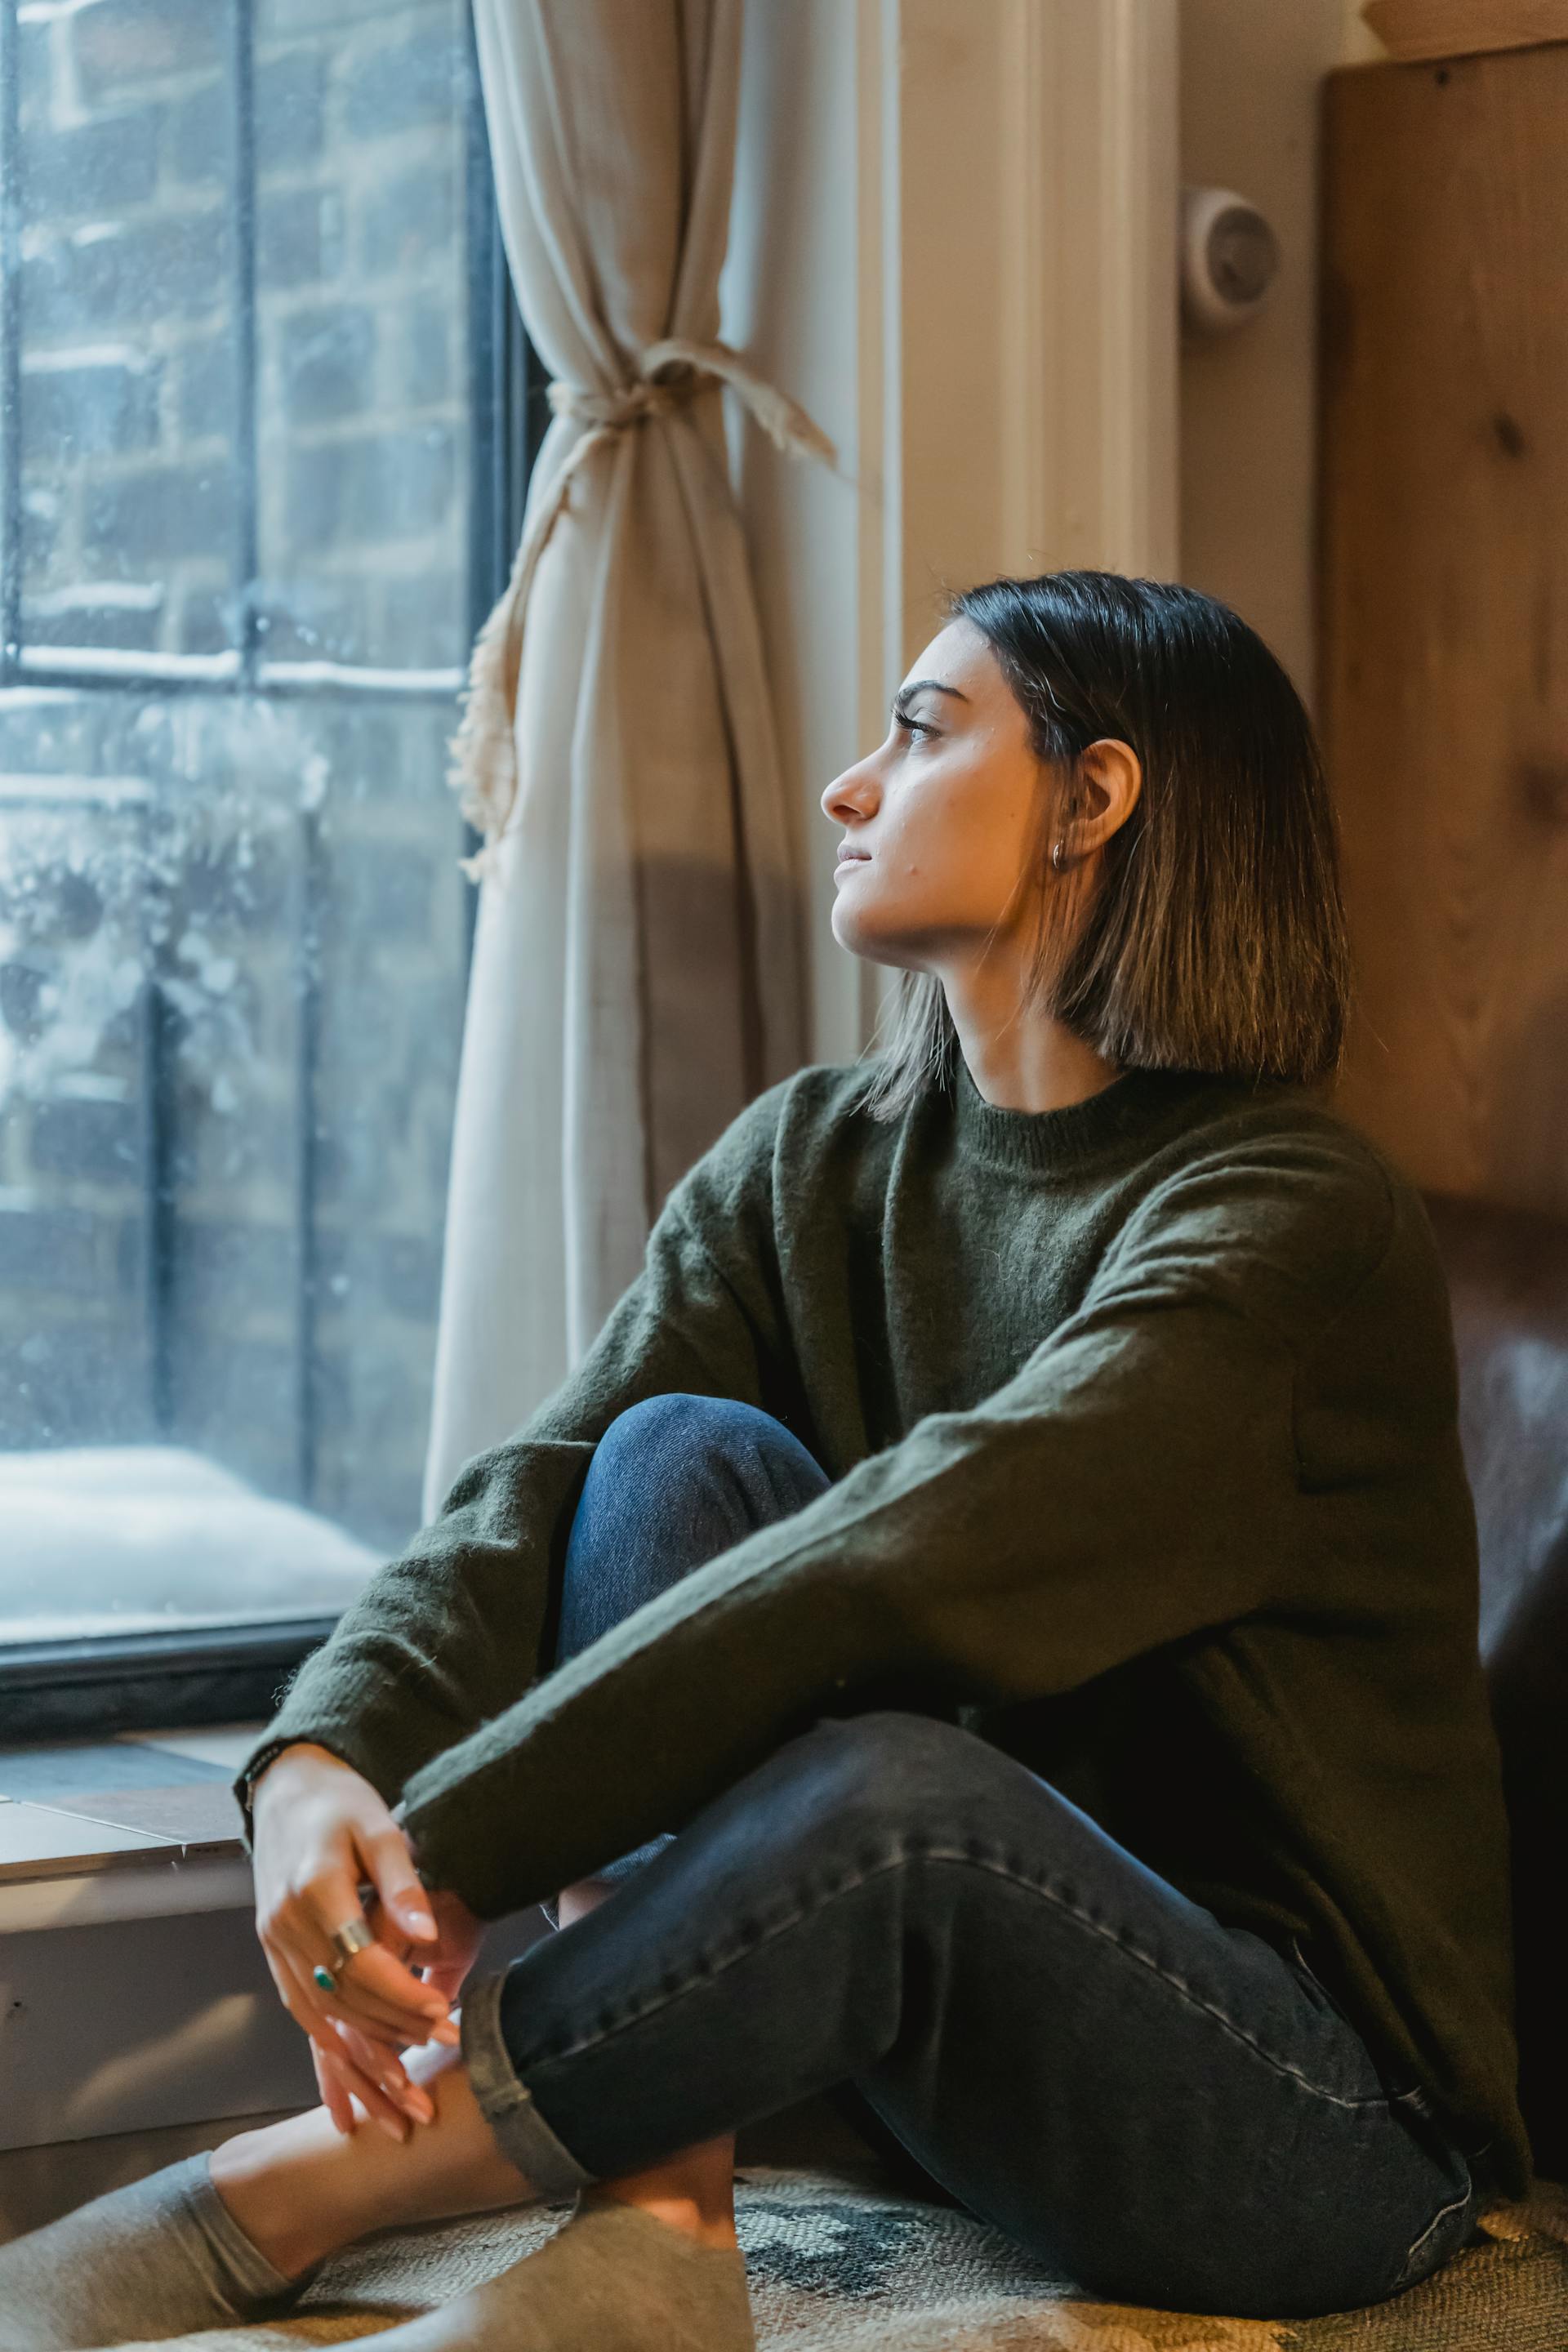 A woman lost in deep thought | Source: Pexels